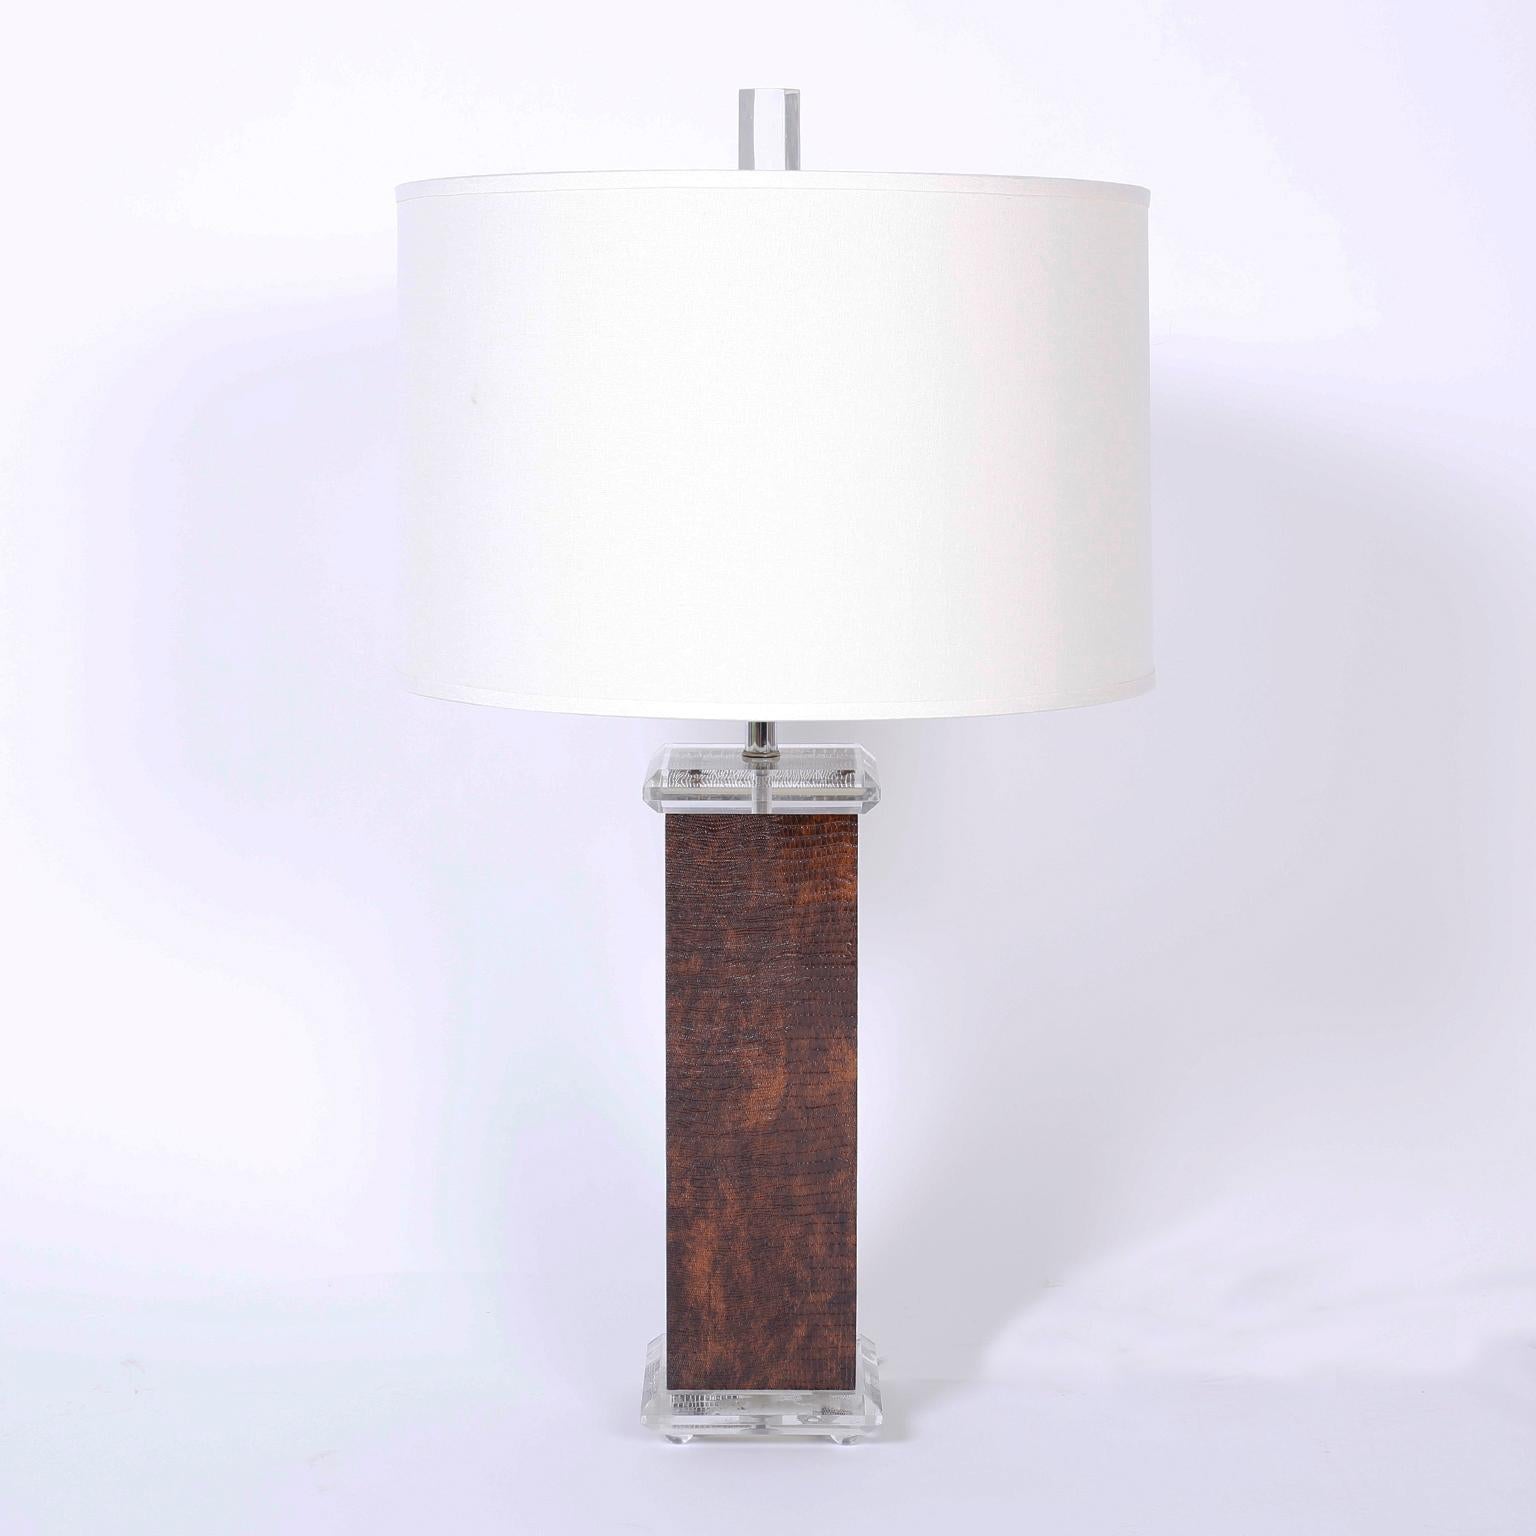 Pair of midcentury table lamps with an exotic mix of materials, having Lucite finials, caps, and feet. Featuring faux lizard wrapped rectangular bodies.